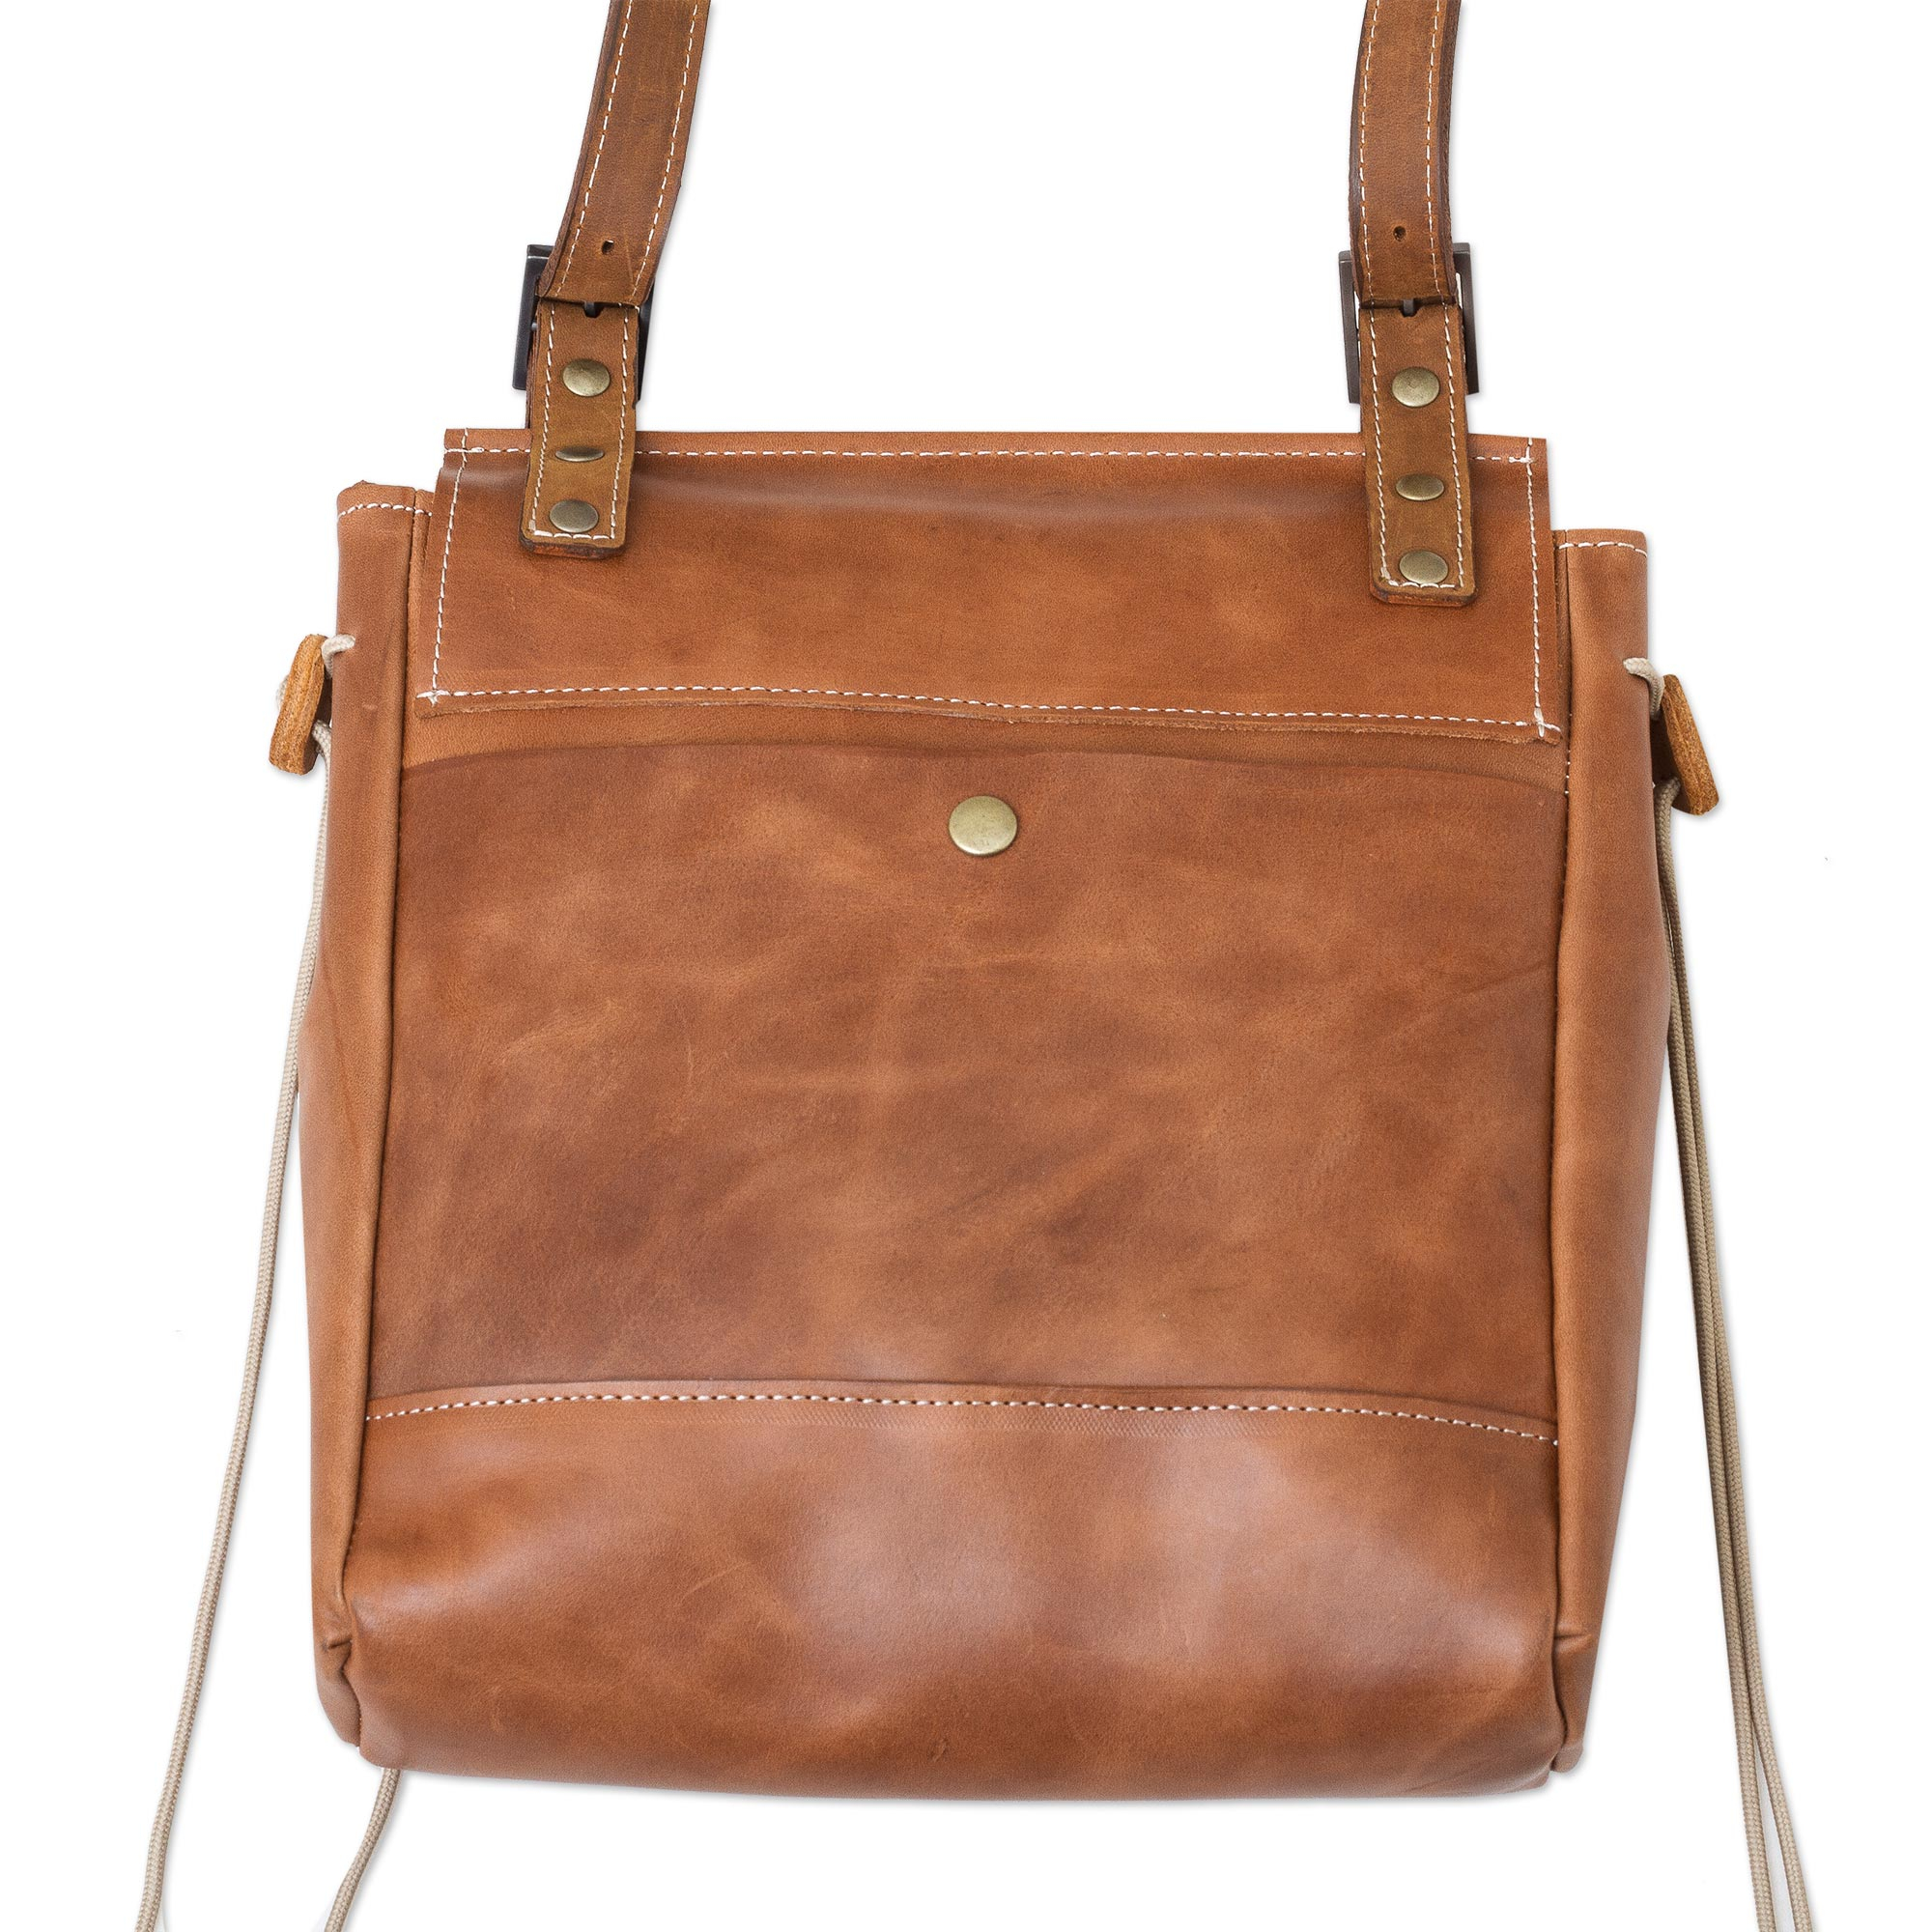 UNICEF Market | Handcrafted Brown Leather Messenger Bag Purse from Peru ...